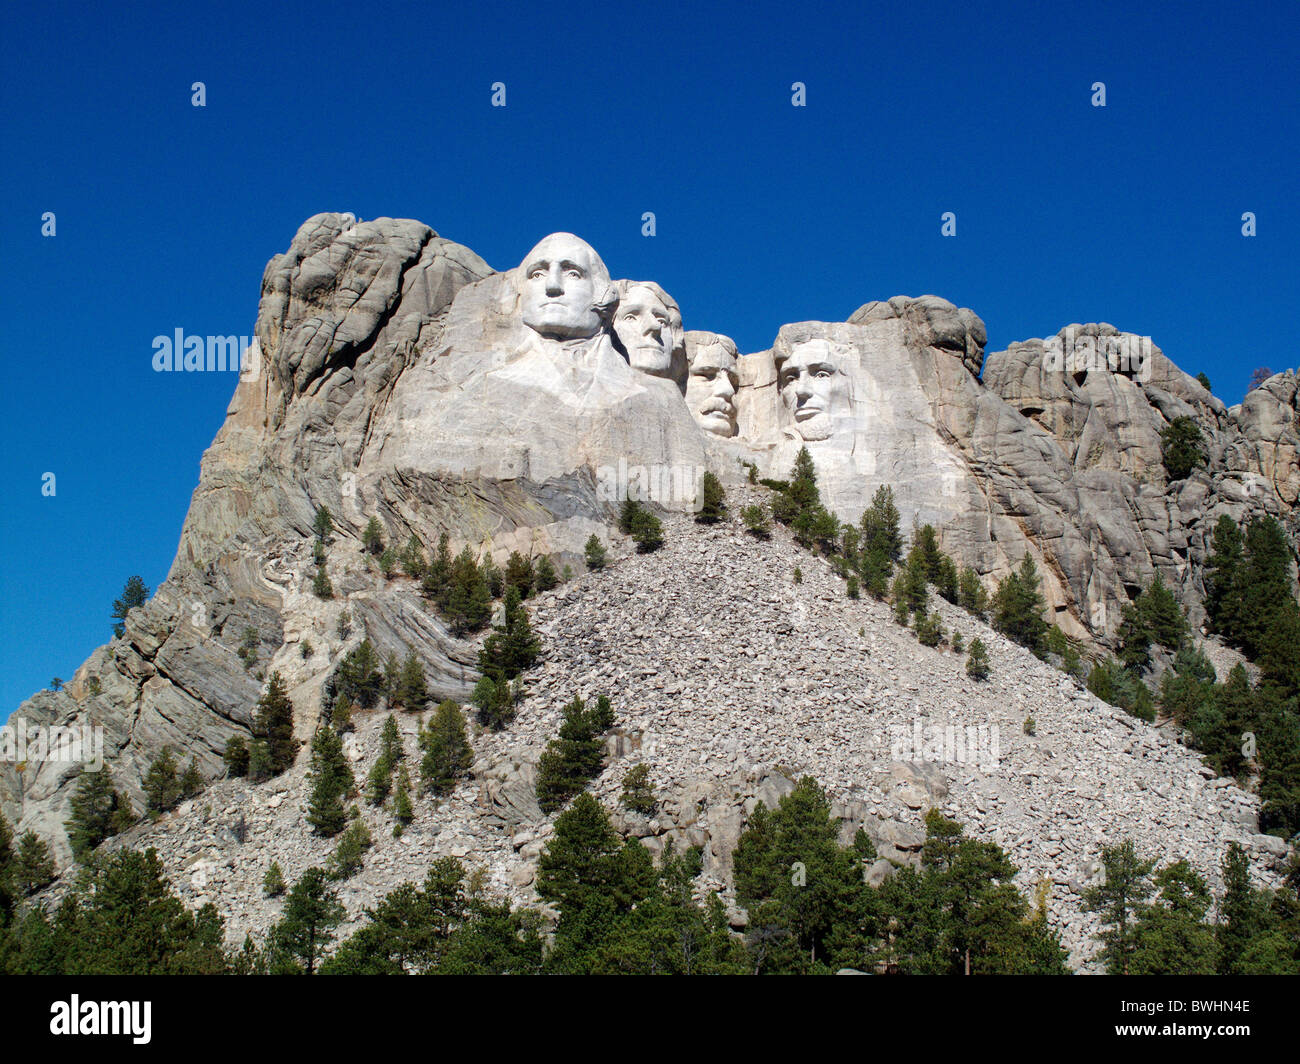 The Mount Rushmore National Monument in the Black Hills in South Dakota, United States Stock Photo